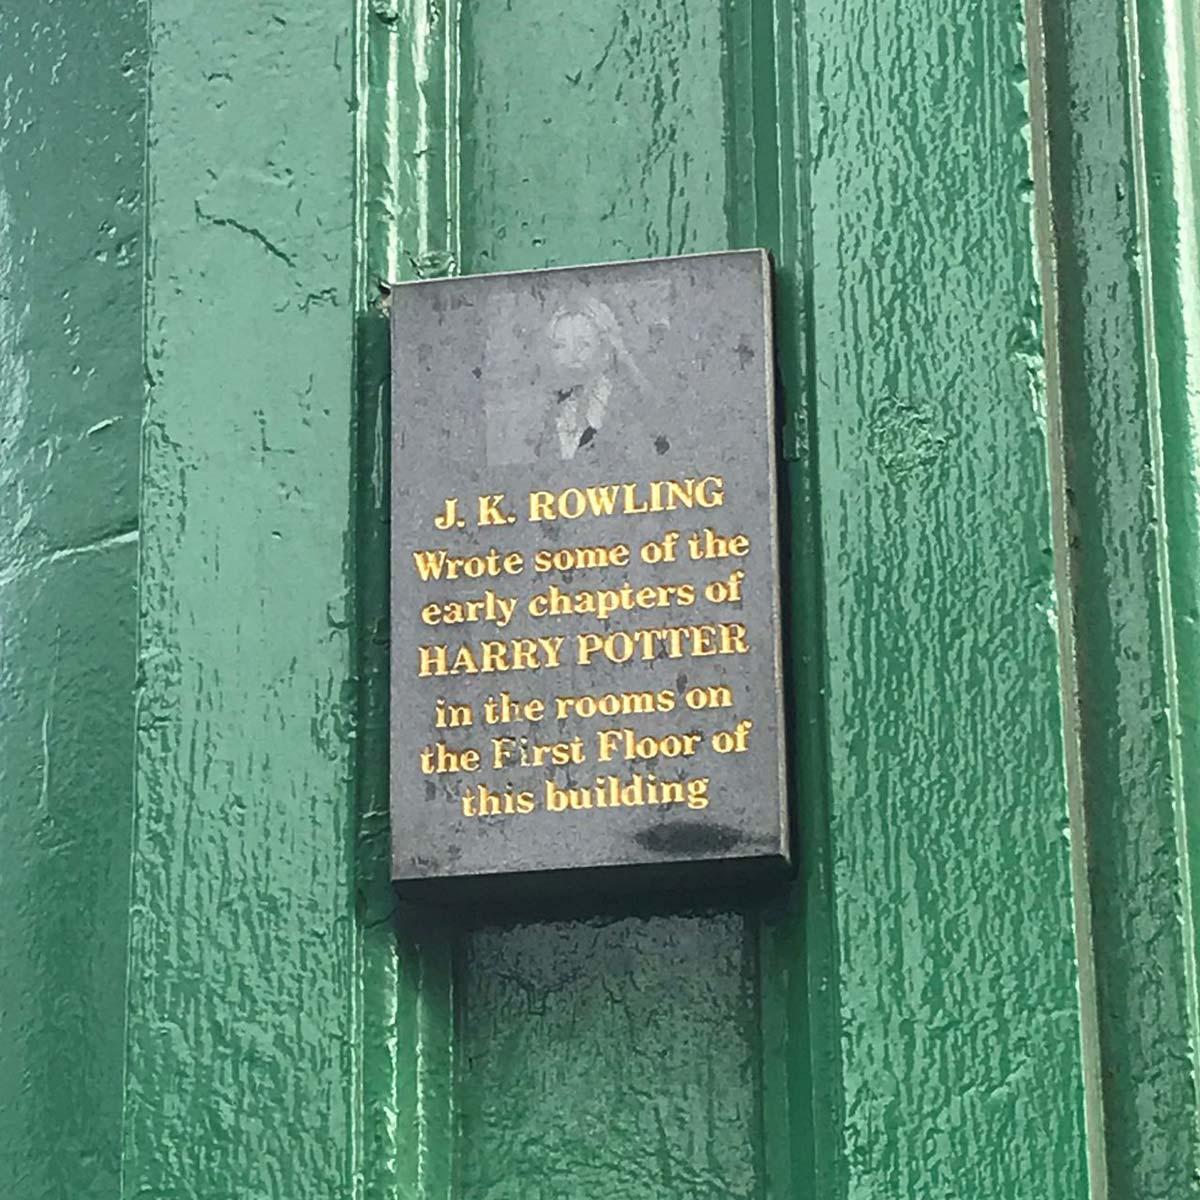 A plaque commemorating the early writing of Harry Potter outside the former Nicolson’s cafe